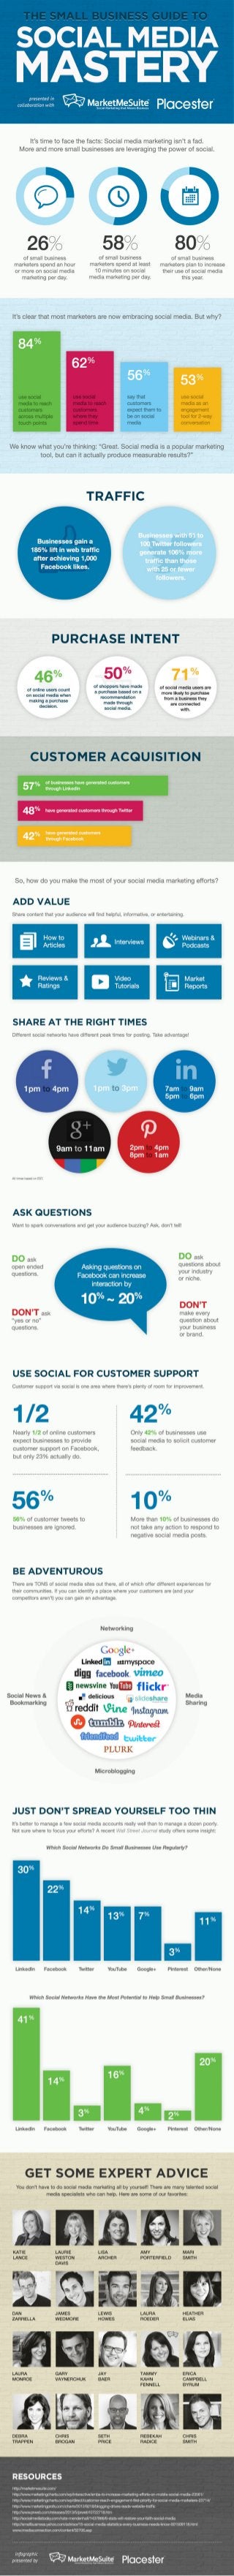 [Infographic] The Small Business Guide to Social Media Mastery